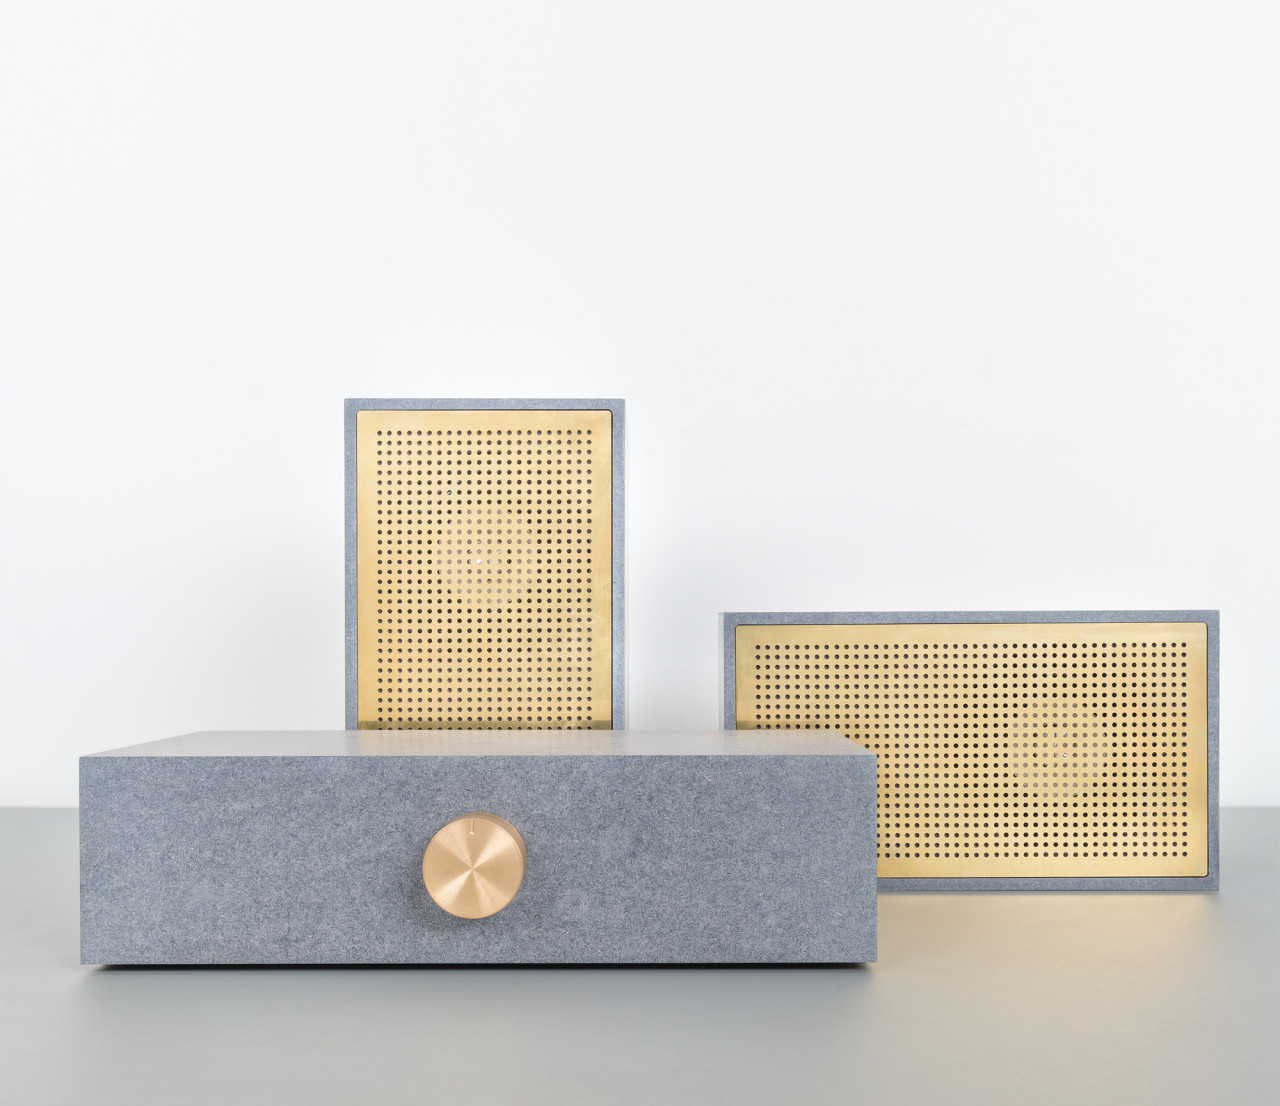 The Osloform Serpentine Stereo Is Stunningly Simple